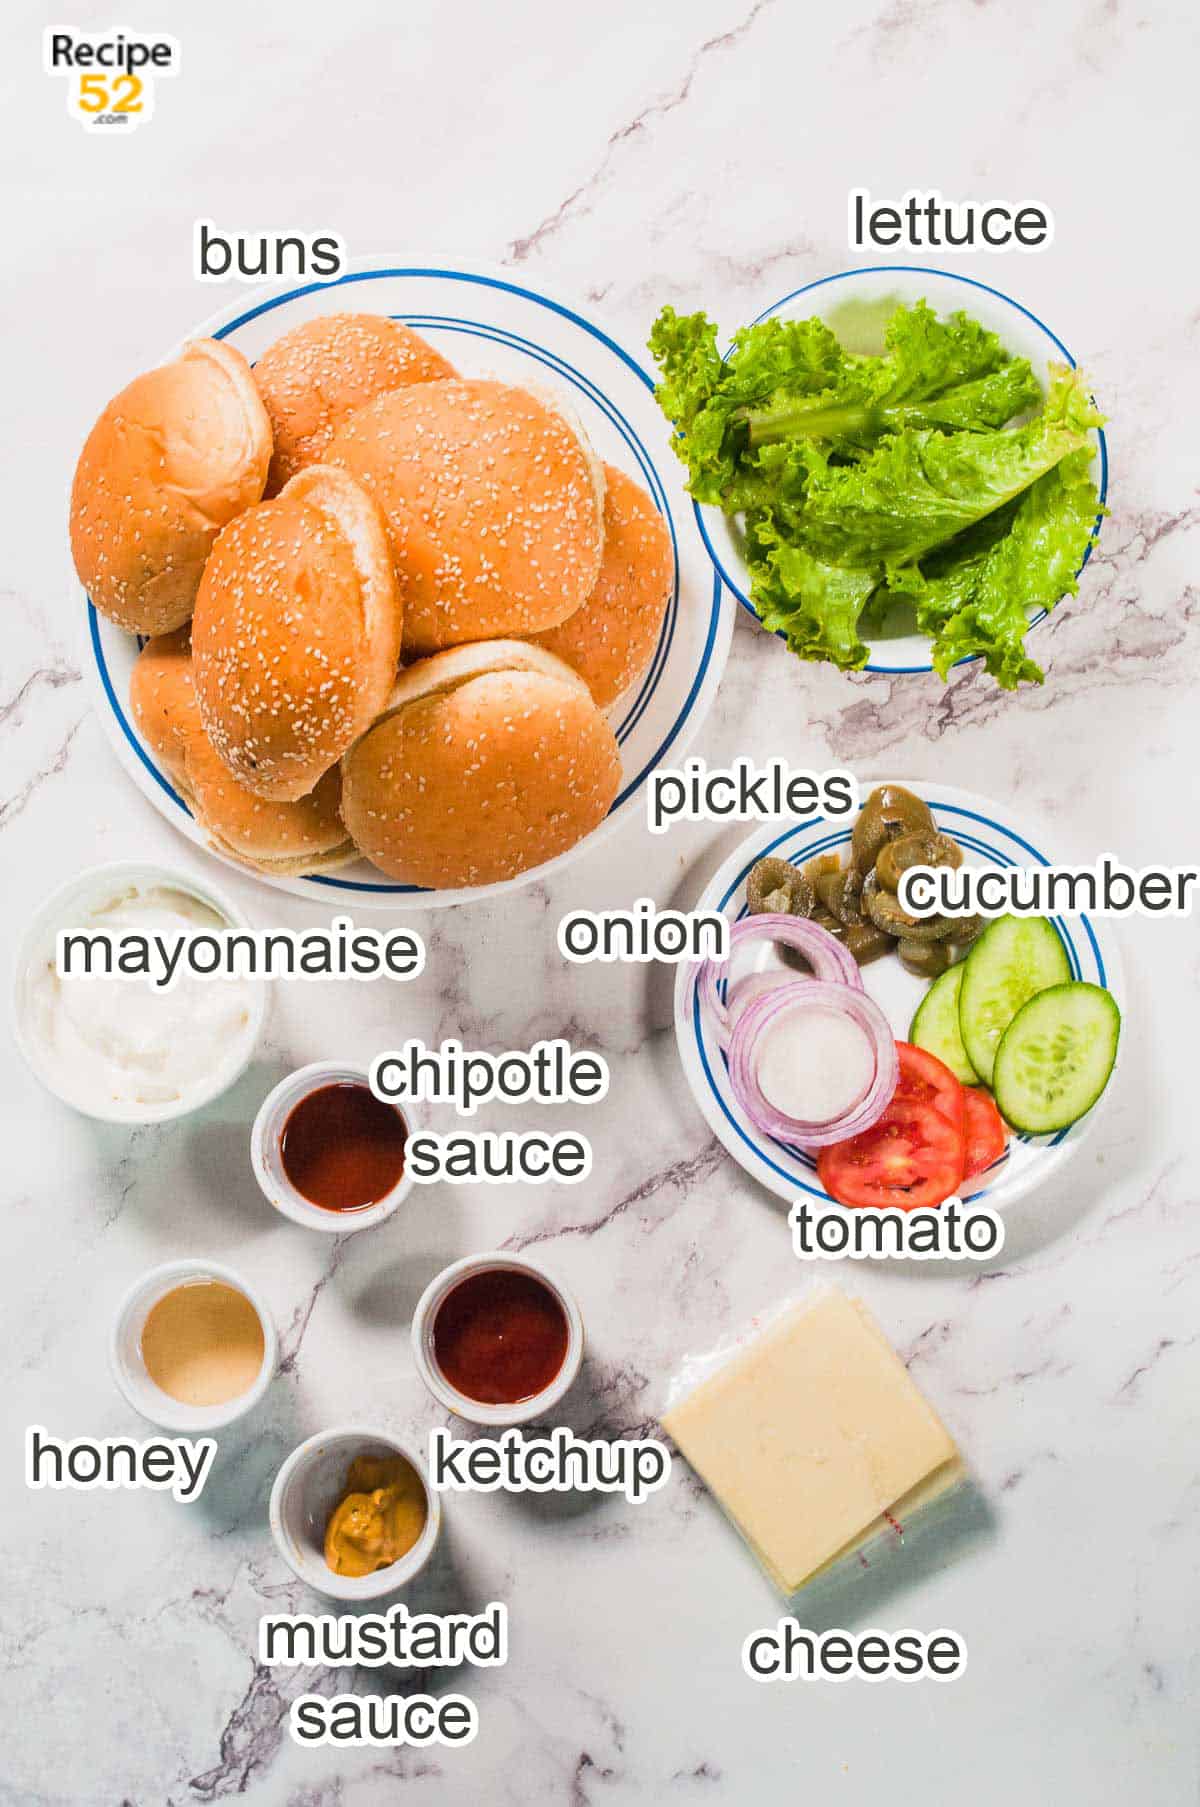 Display of assembling ingredients for chicken sandwich.